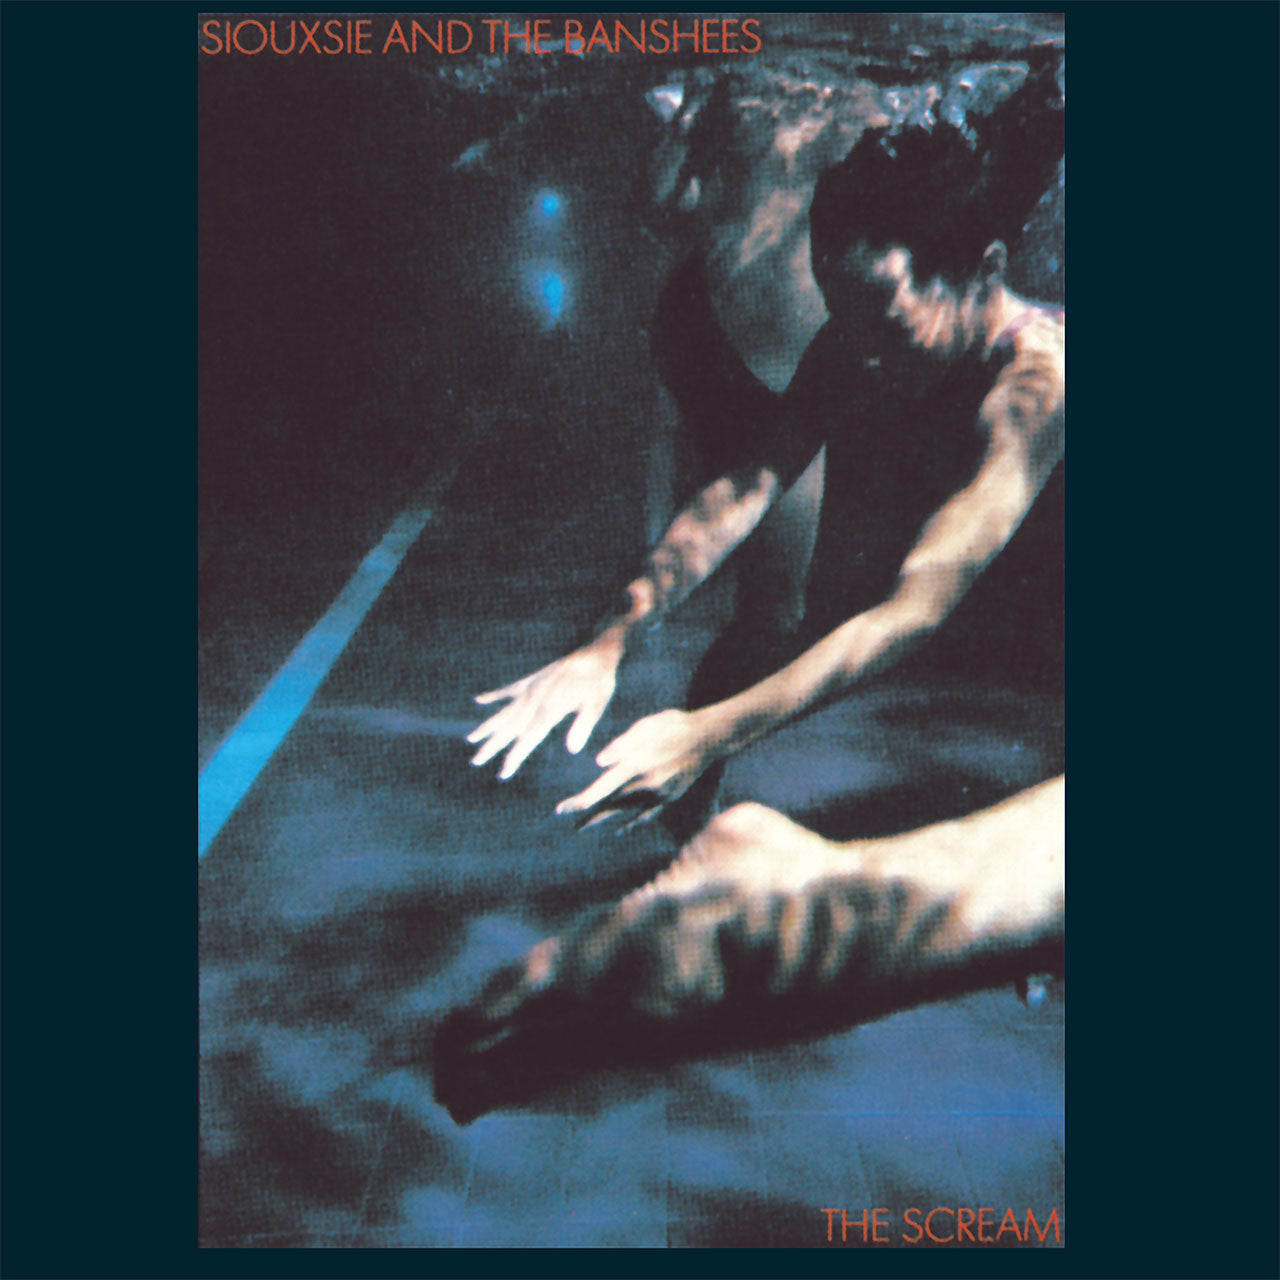 Siouxsie and the Banshees - The Scream (CD)